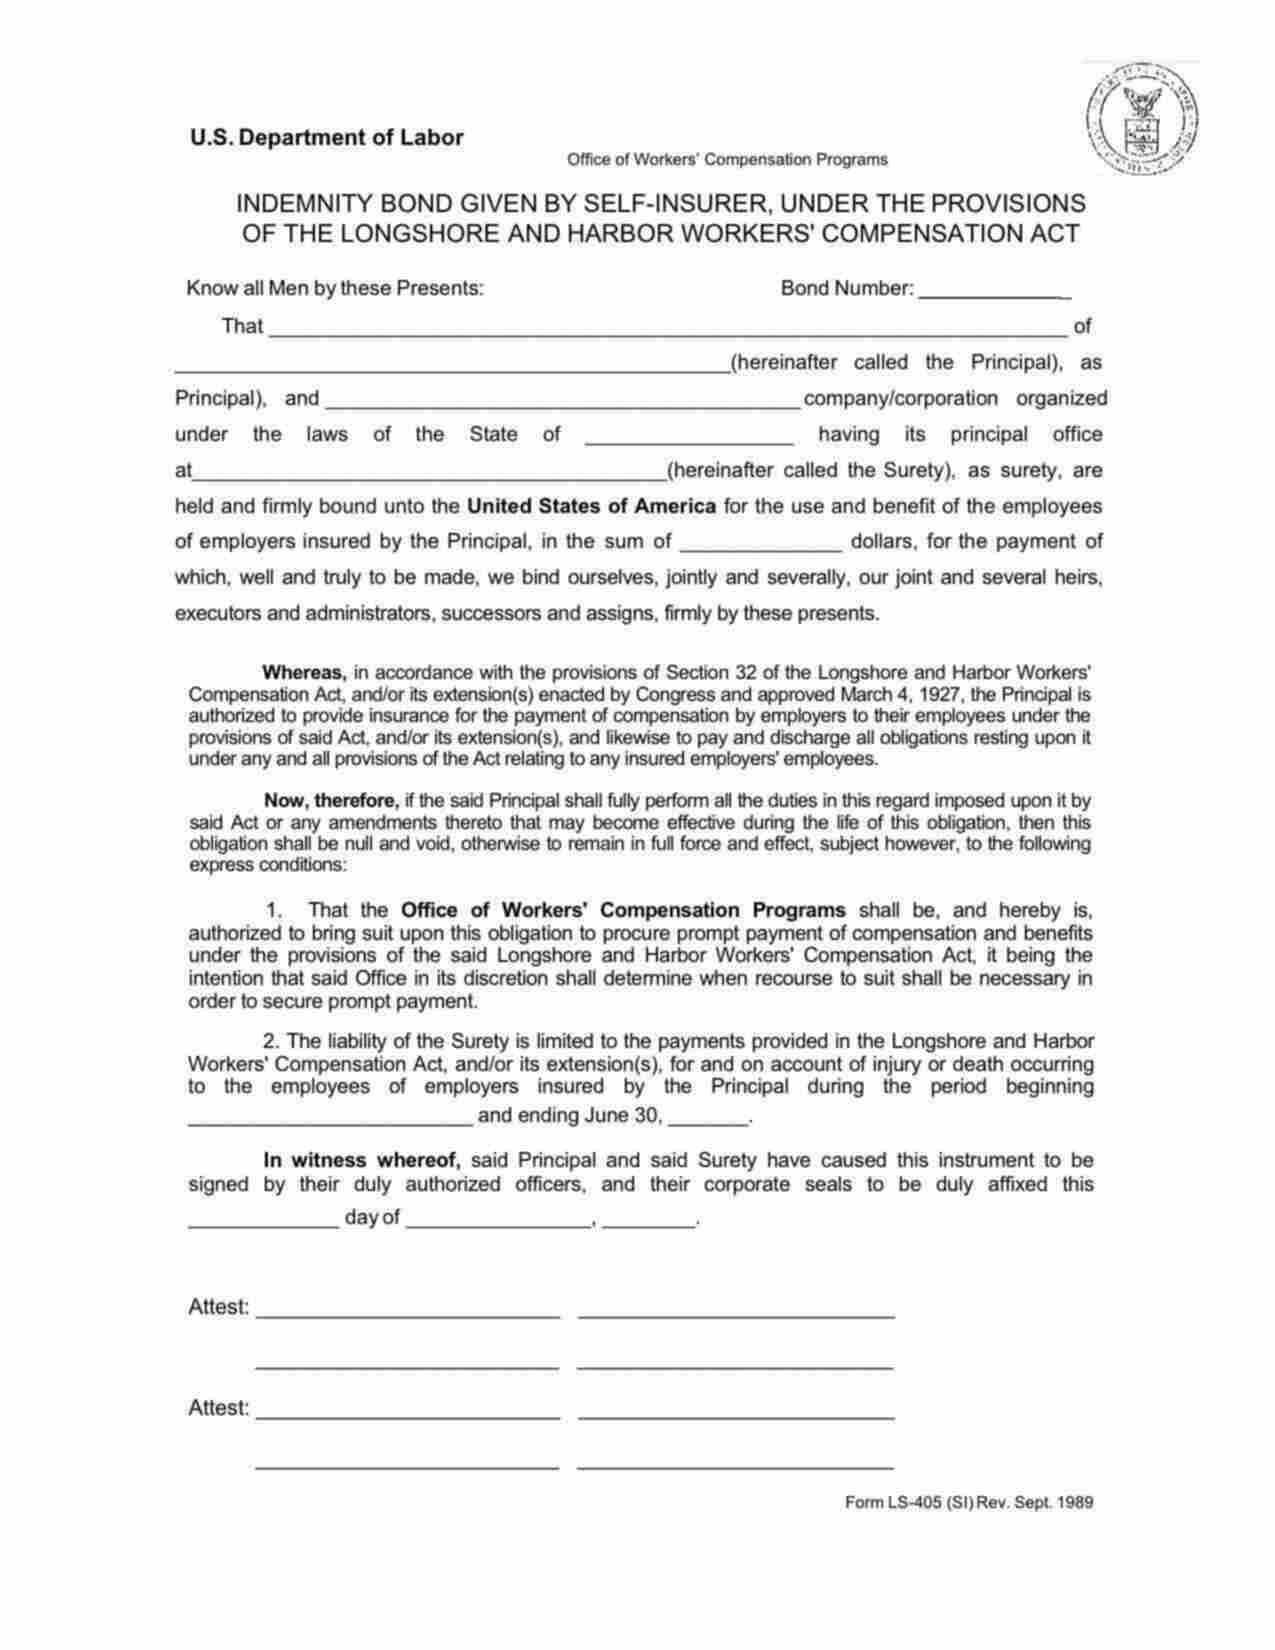 Federal Self-Insurer of the Longshore and Harbor Workers' Compensation Act Bond Form